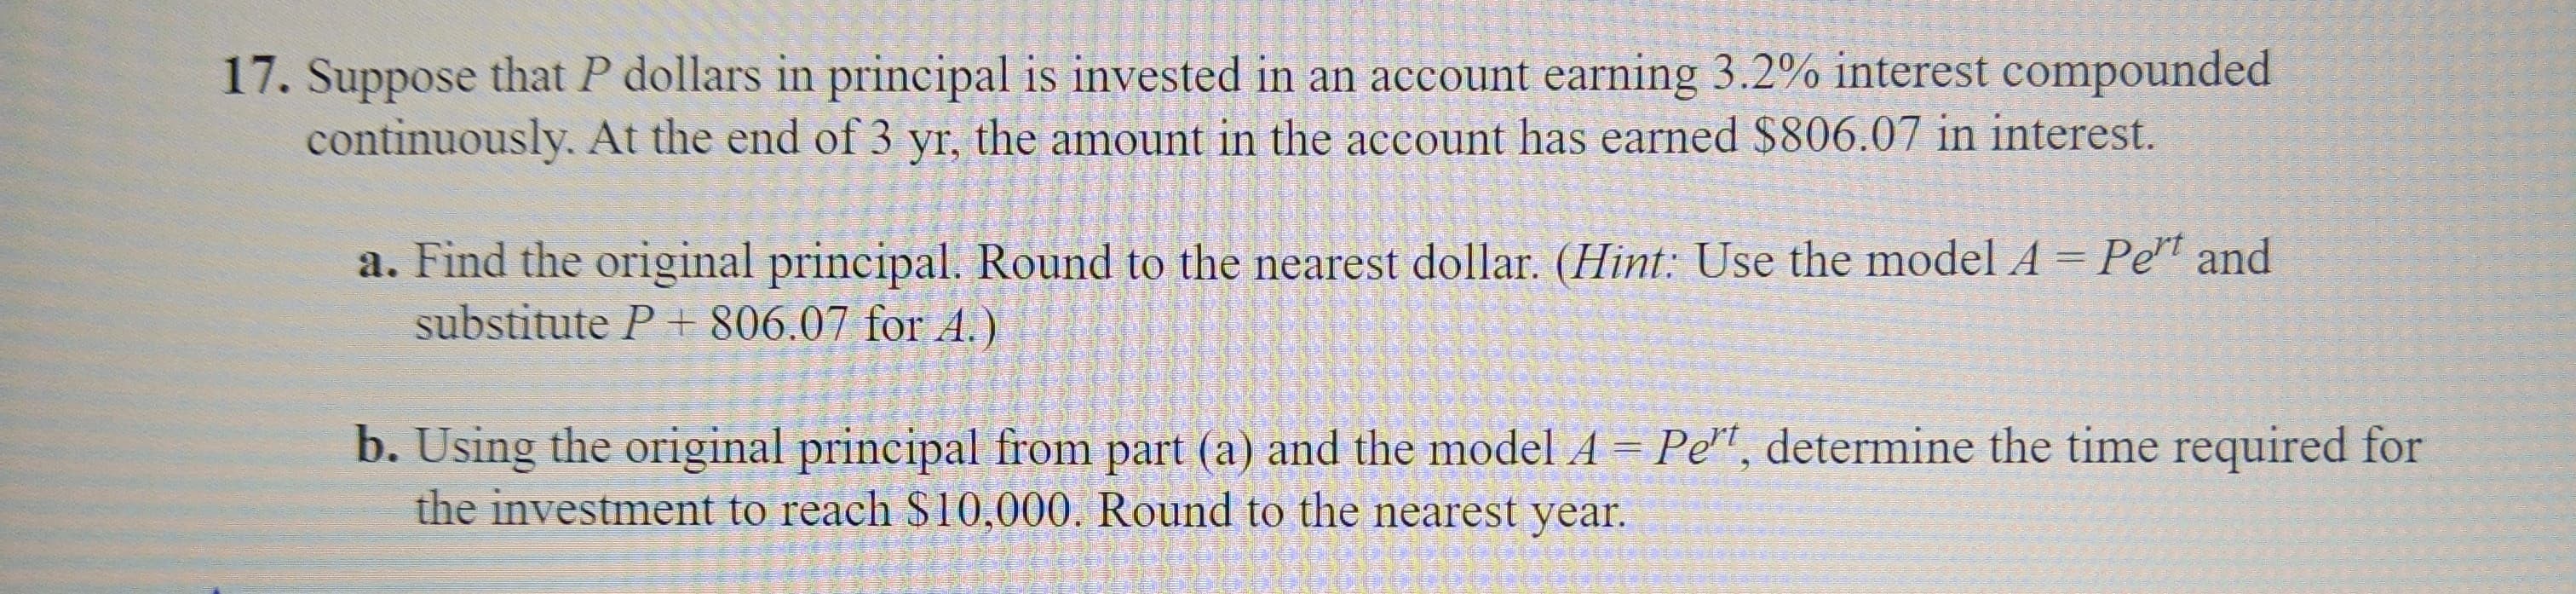 17. Suppose that P dollars in principal is invested in an account earning 3.2% interest compounded
continuously. At the end of 3 yr, the amount in the account has earned $806.07 in interest.
a. Find the original principal. Round to the nearest dollar. (Hint: Use the model A = Pe" and
substitute P + 806.07 for A.)
b. Using the original principal from part (a) and the model A = Pe", determine the time required for
the investment to reach $10,000. Round to the nearest year.
